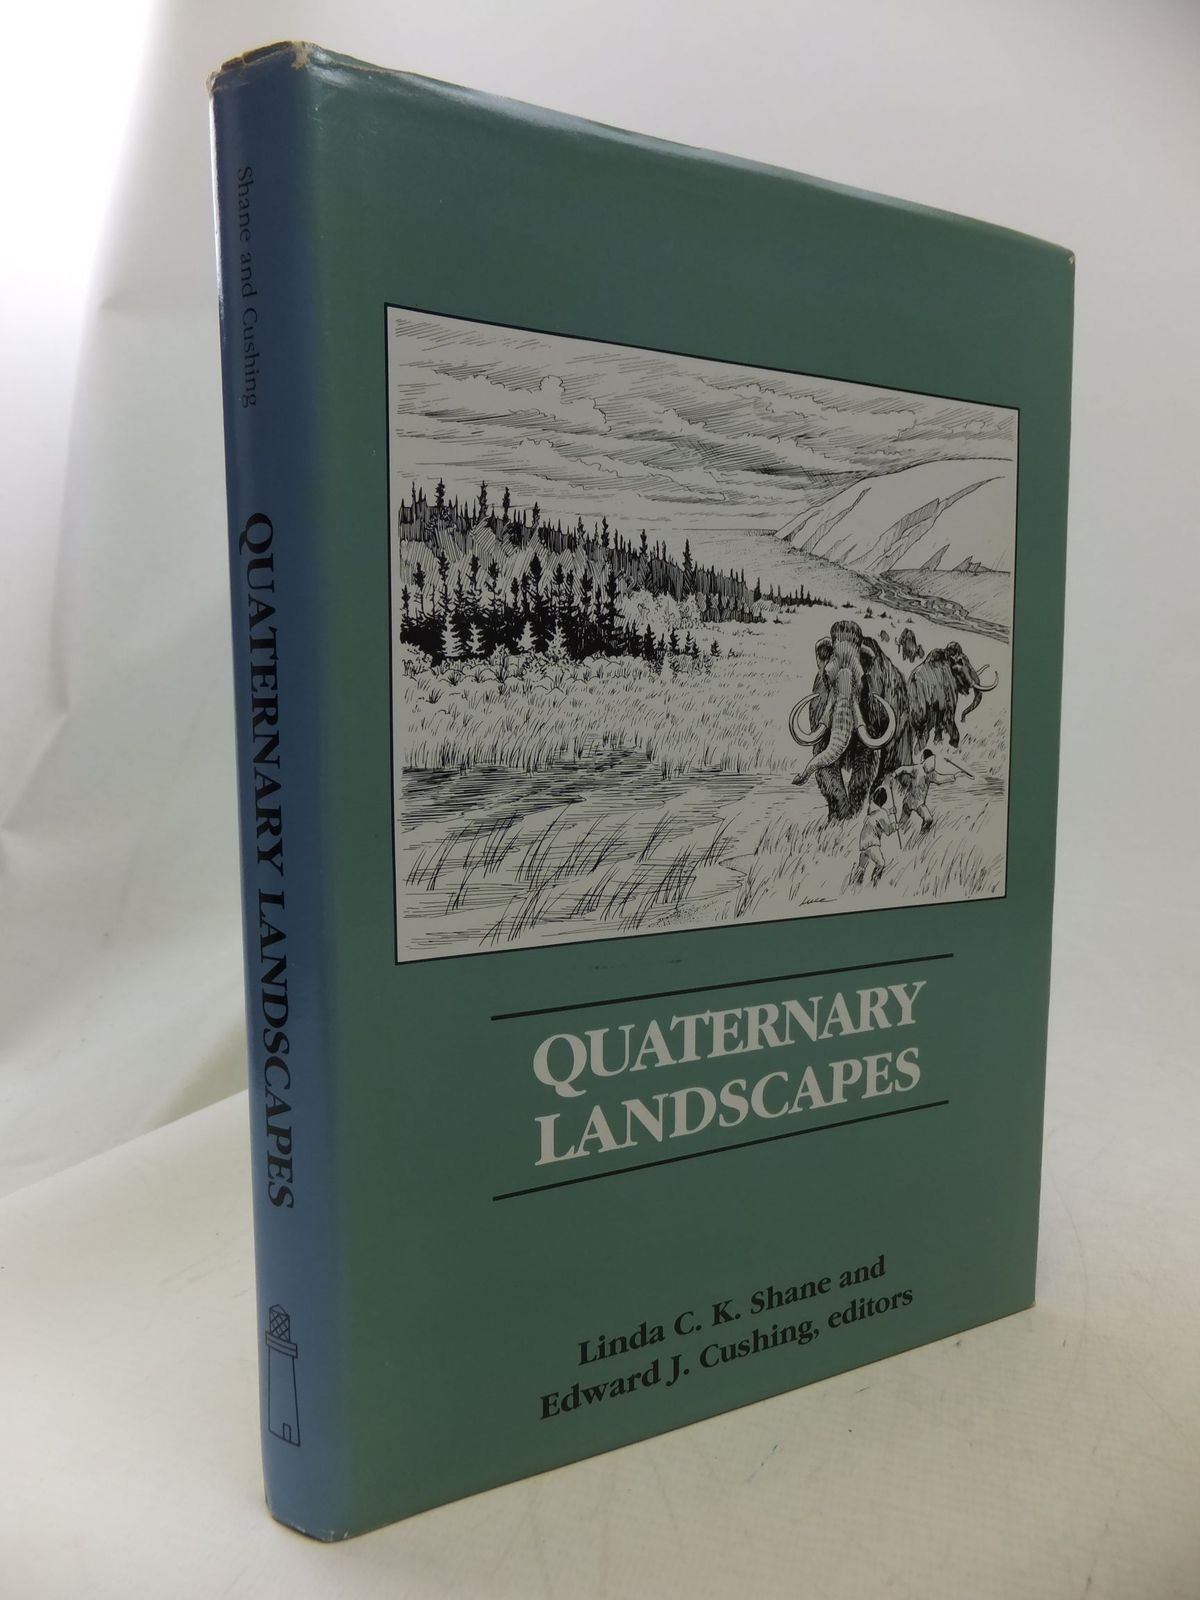 Photo of QUATERNARY LANDSCAPES written by Shane, Linda C.K. Cushing, Edward J. published by Belhaven Press (STOCK CODE: 1710855)  for sale by Stella & Rose's Books